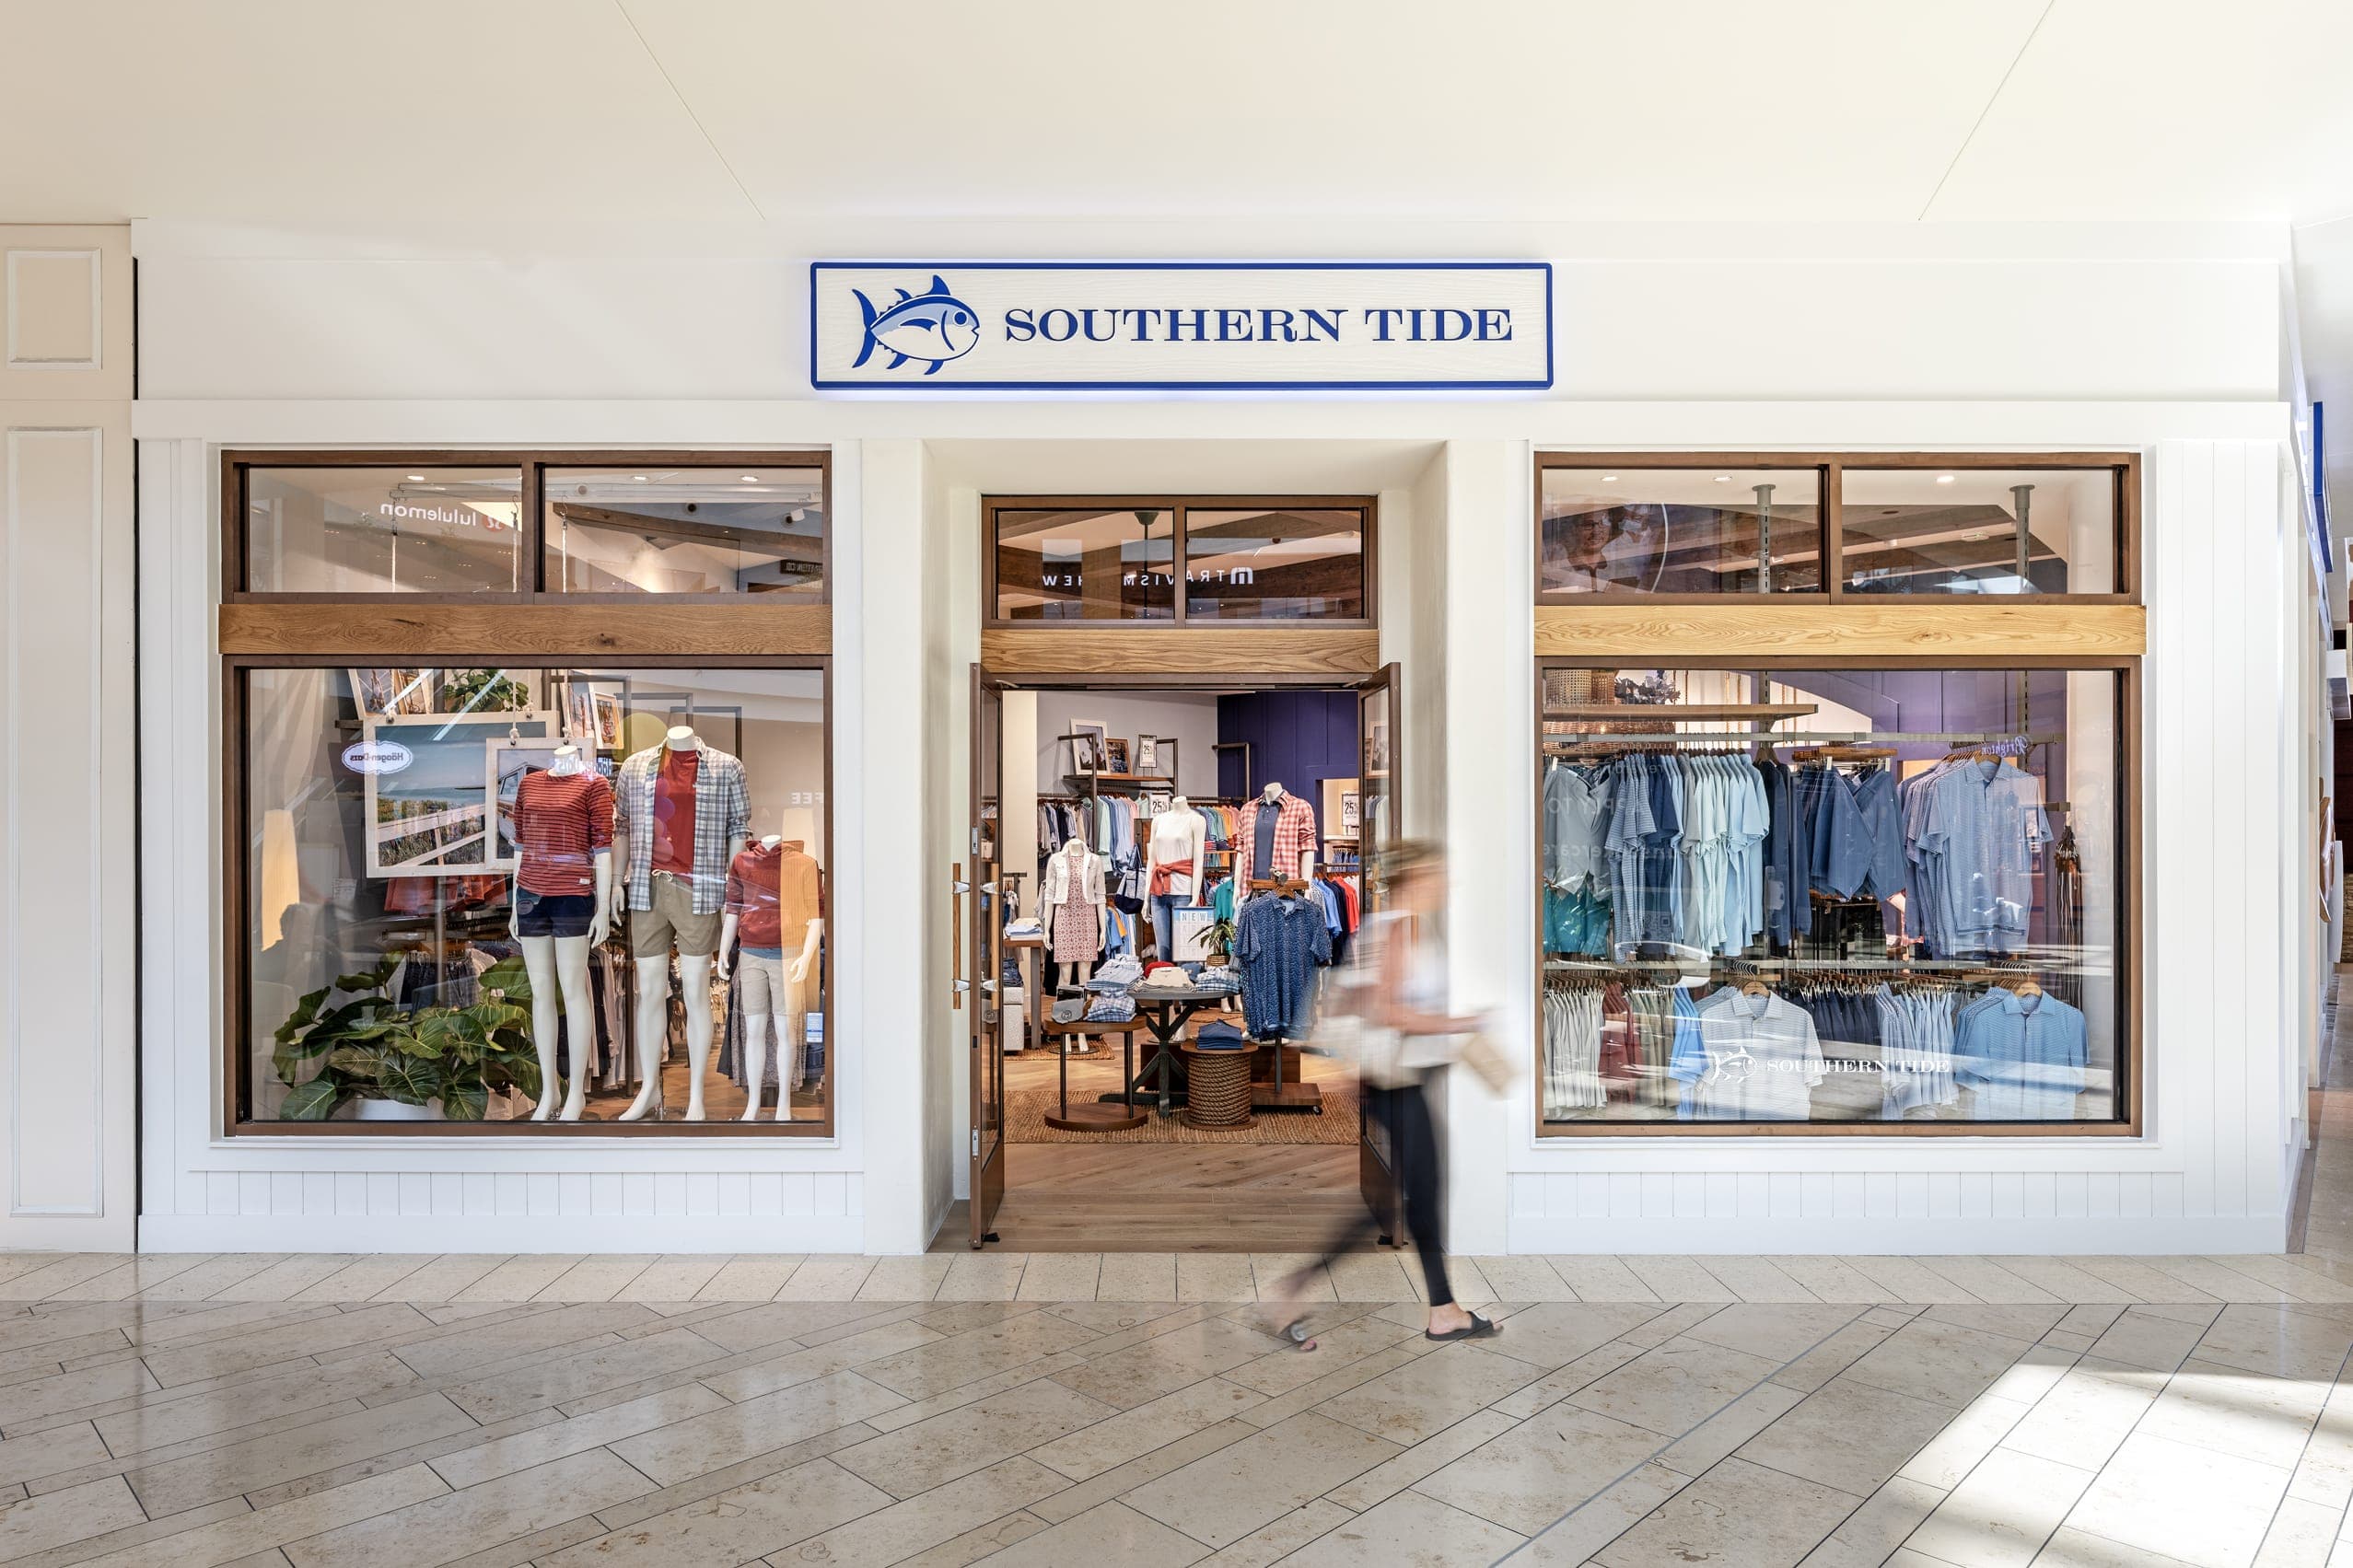 Southern Tide Store Front Exterior In Shopping Mall Utc One Pedestrians Walking Past